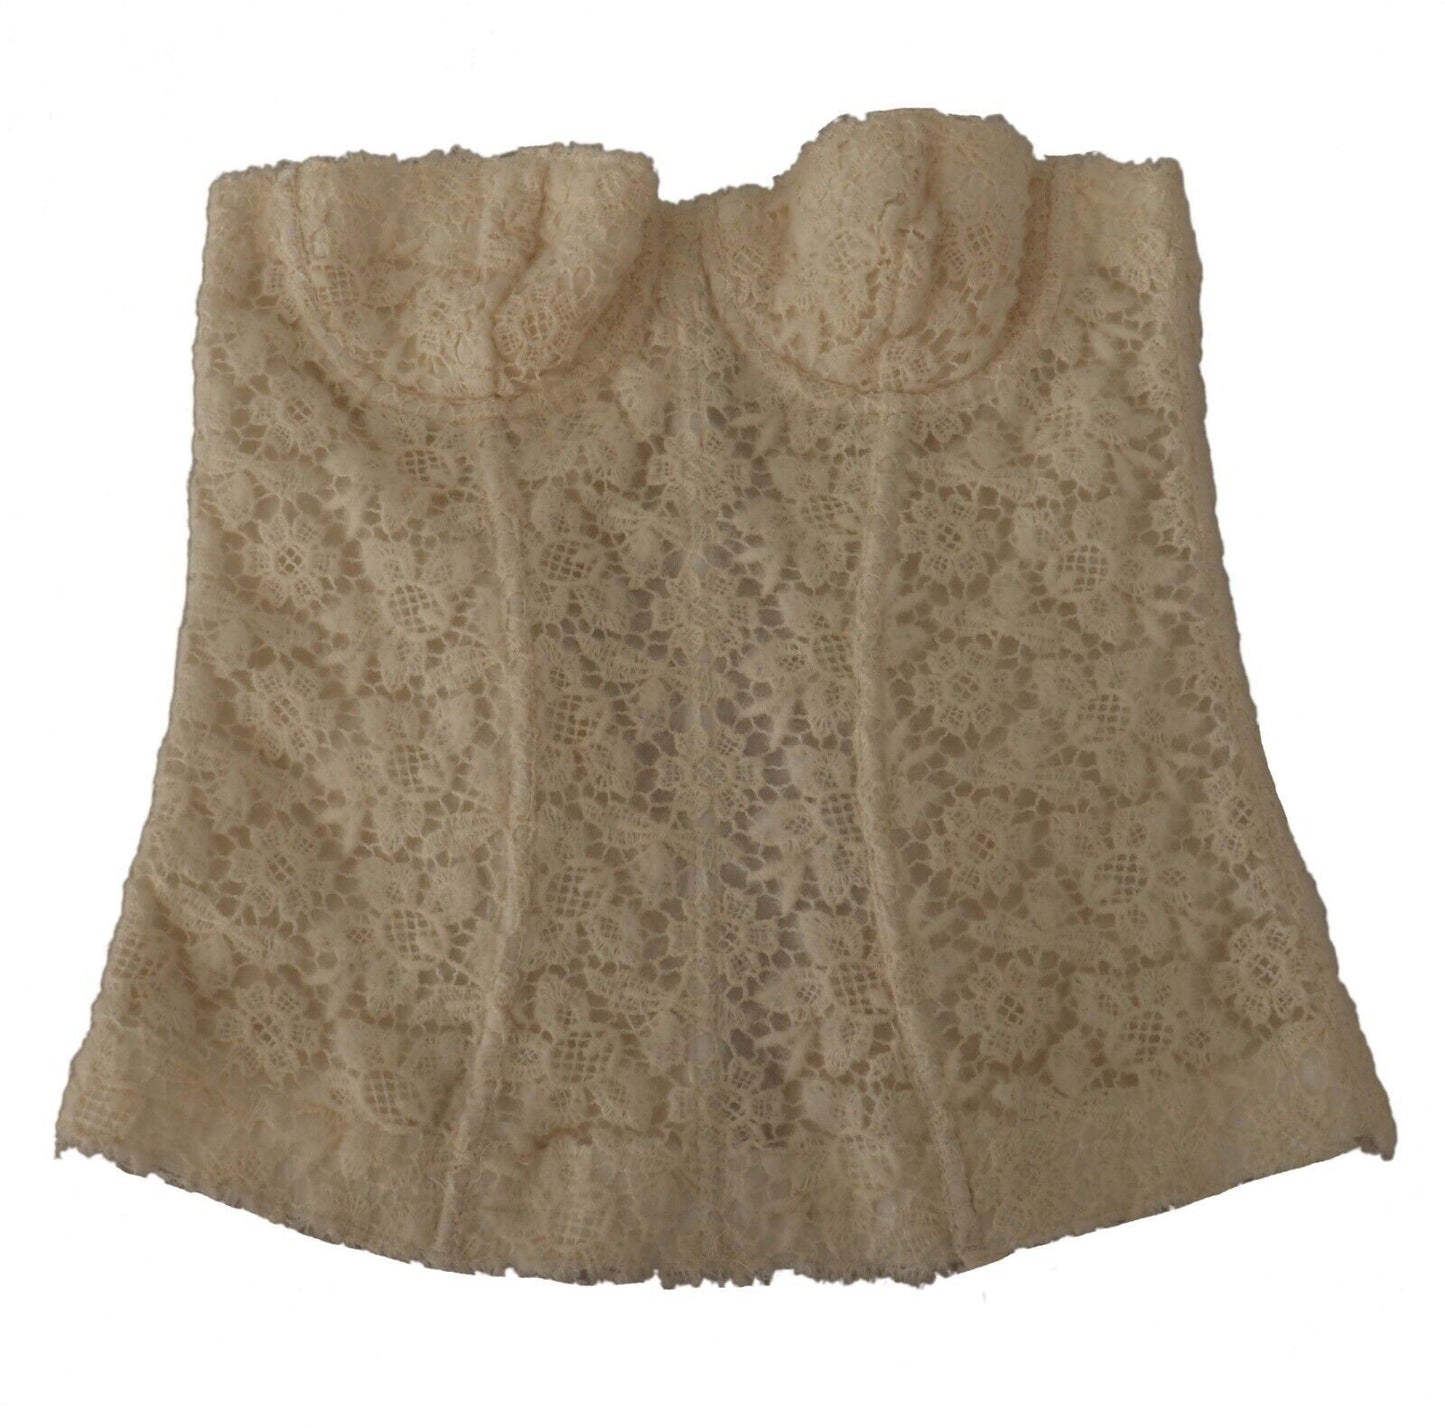 Chic Off-White Floral Lace Corset Top